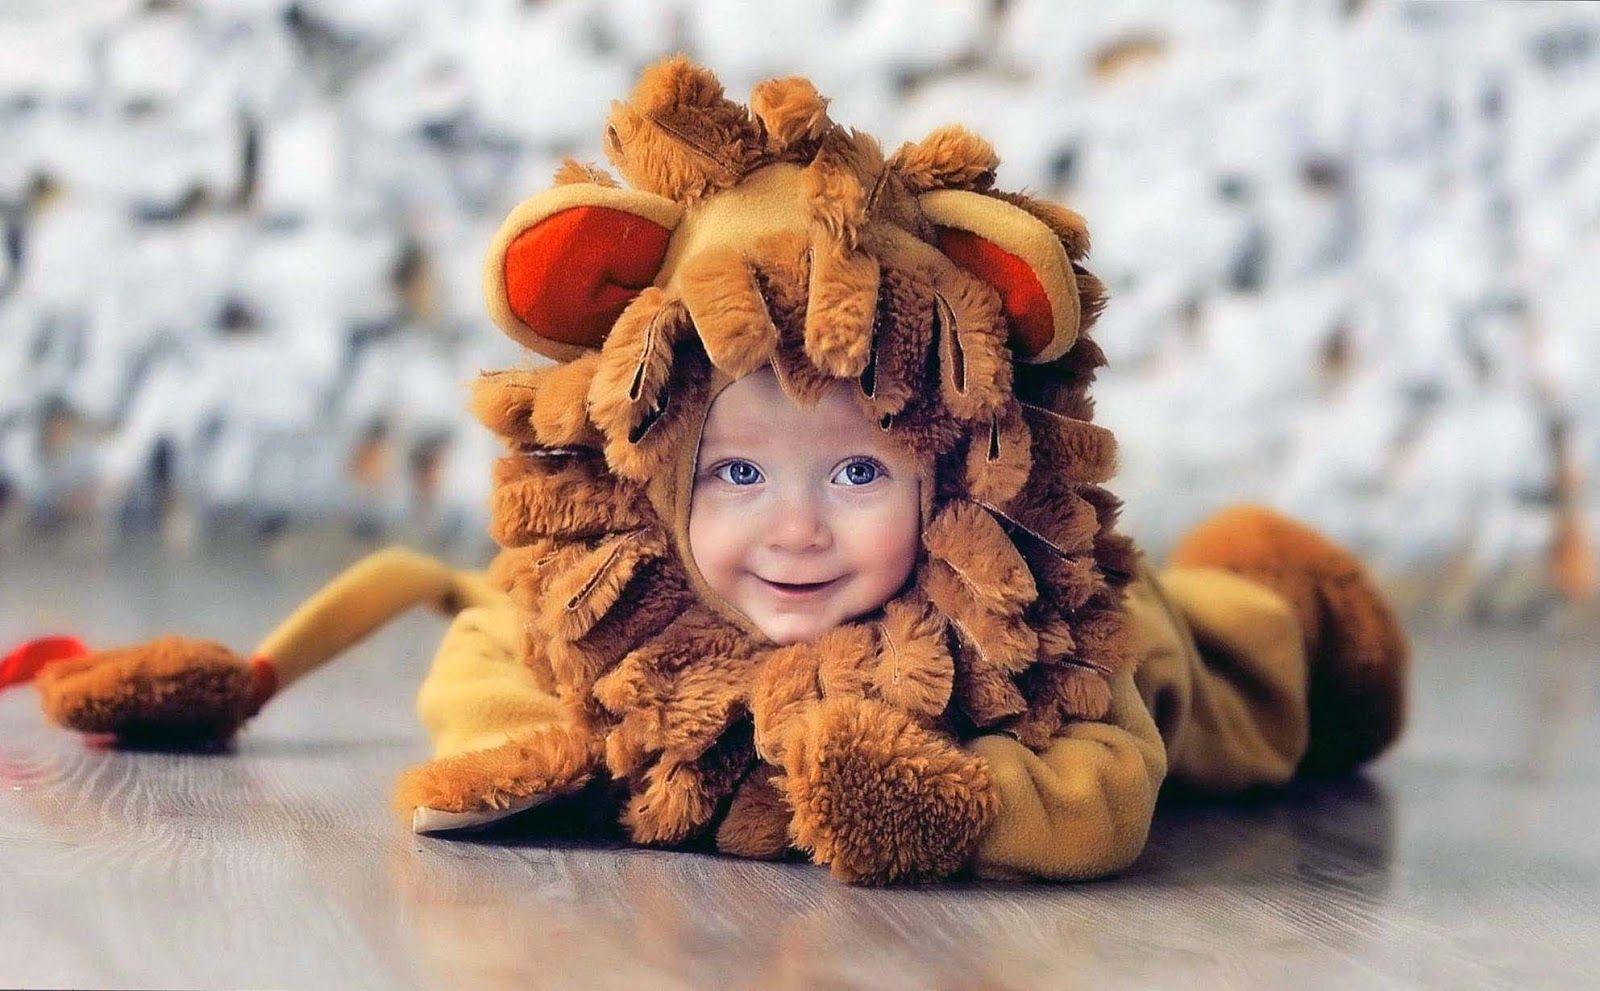 Cute and Lovely Baby Picture. Cutest